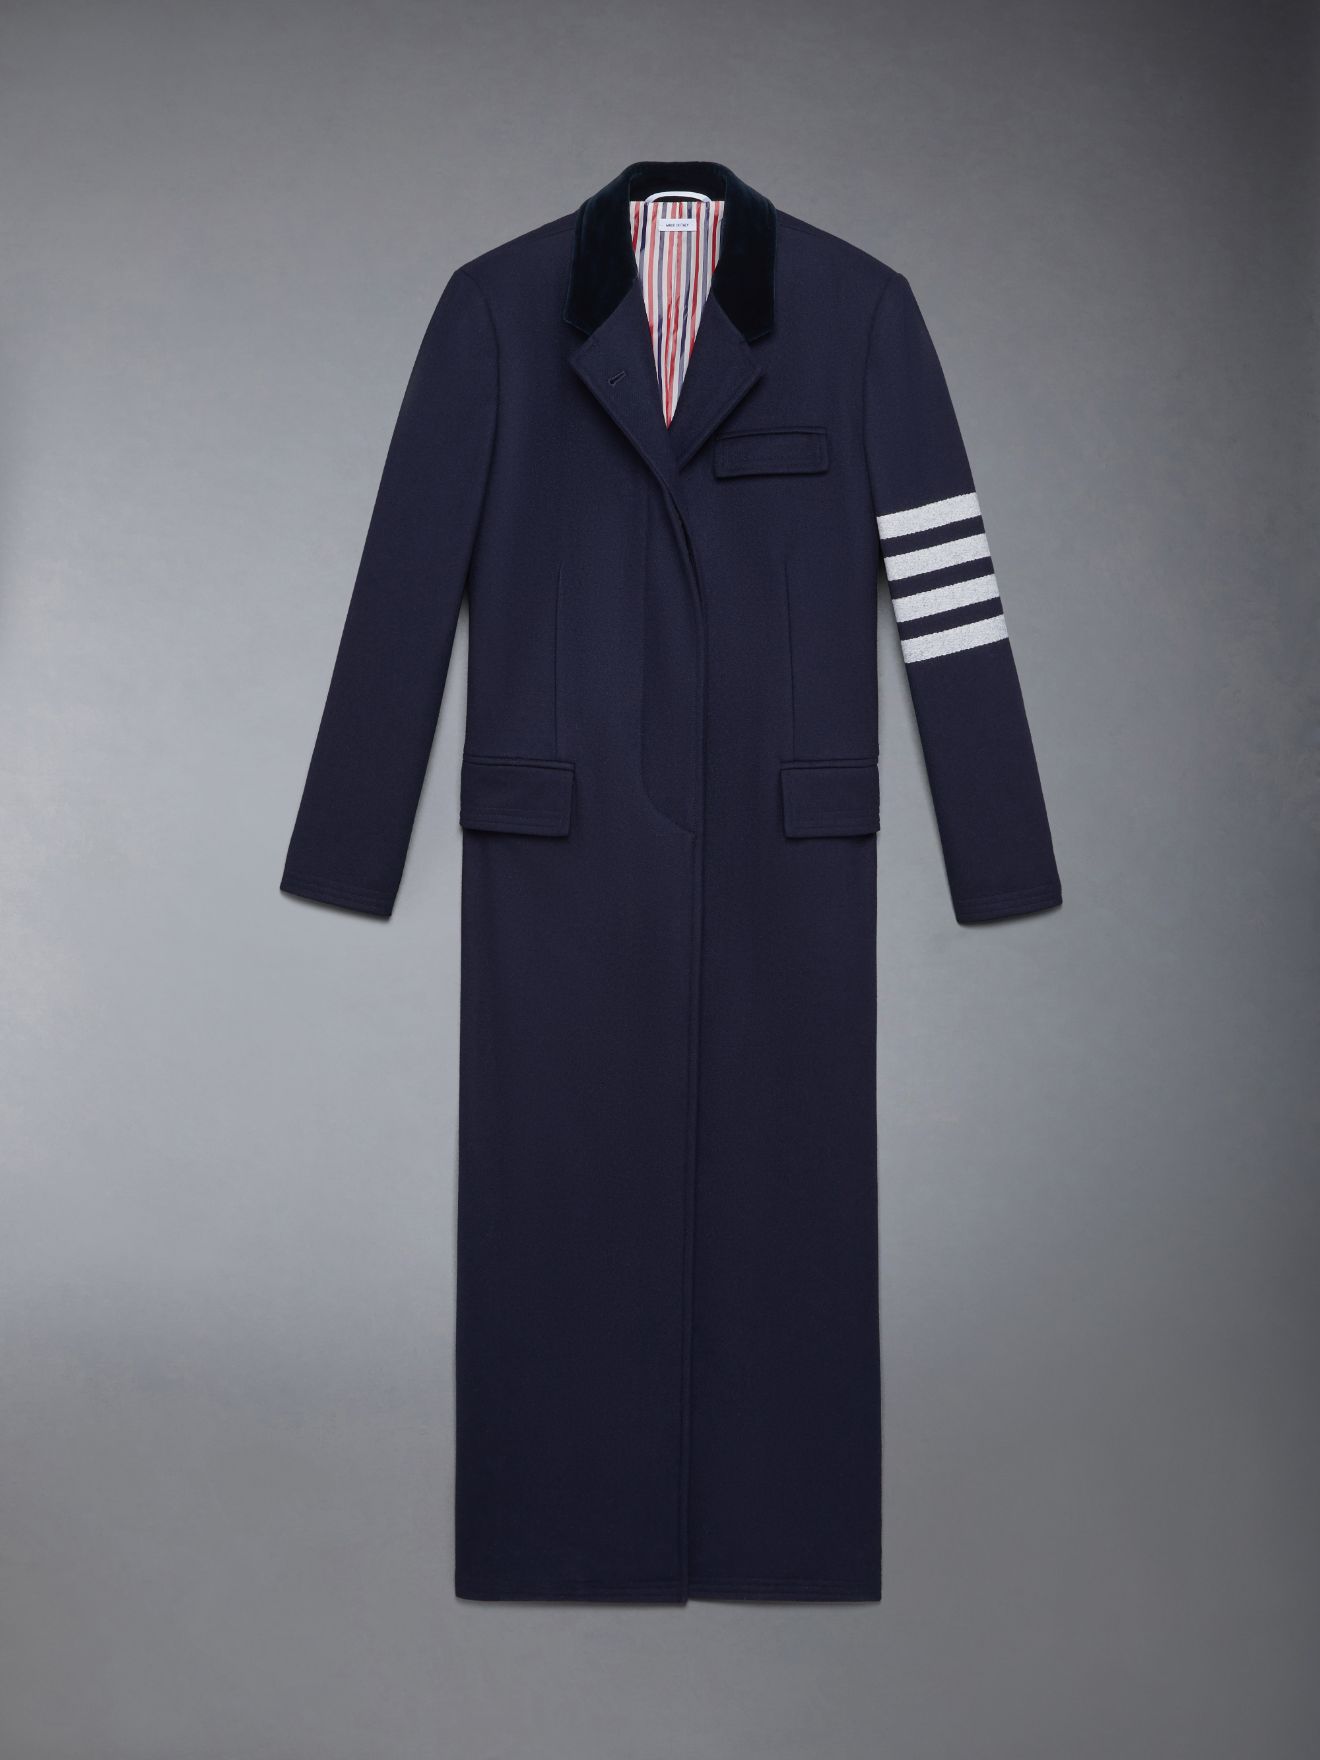 Melton Wool 4-Bar Chesterfield Overcoat | Thom Browne